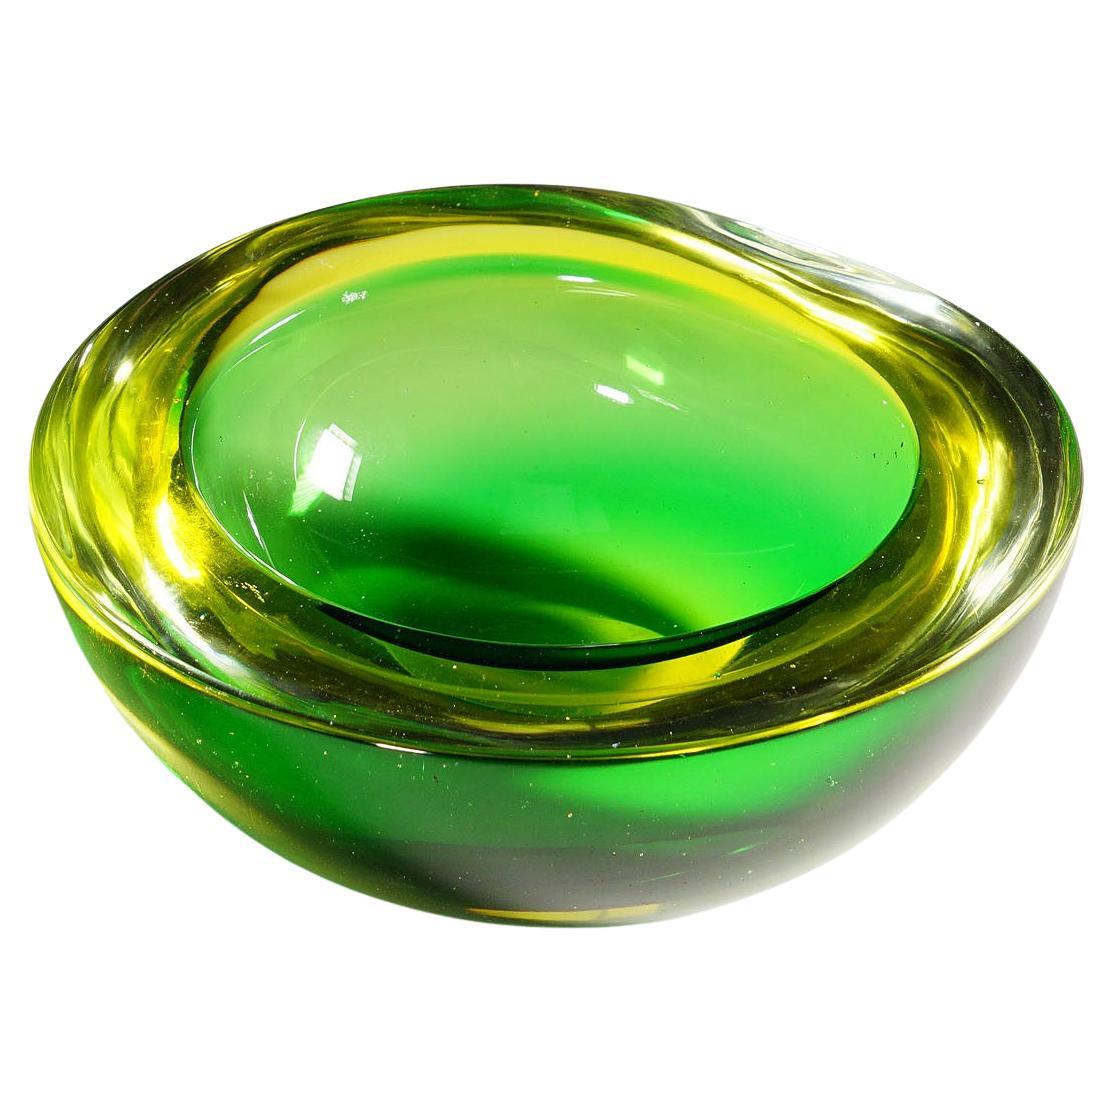 Archimede Seguso Geode Bowl in Green and Yellow, Murano Italy Ca. 1960s